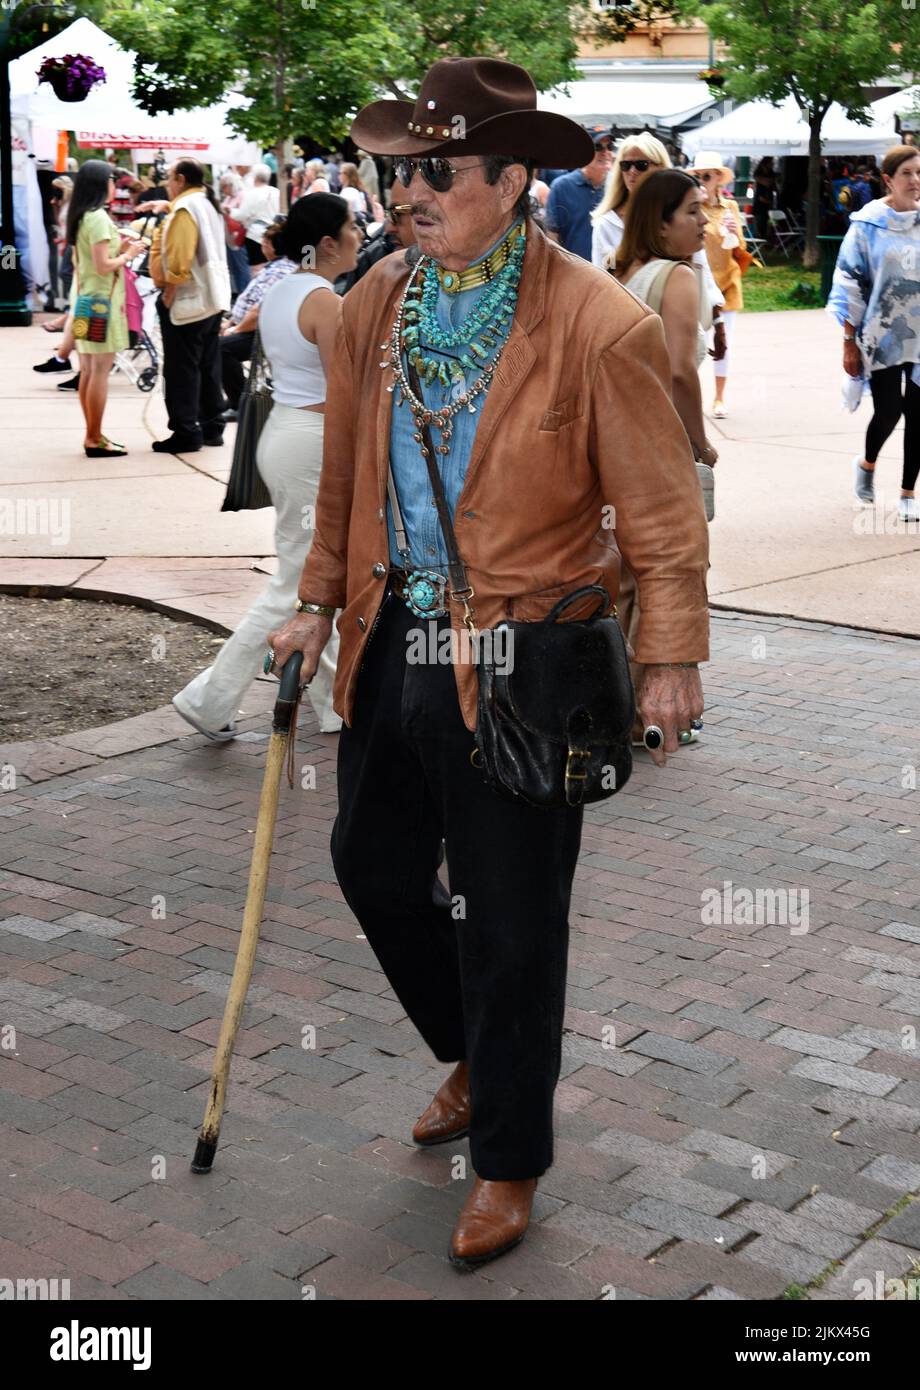 A man dressed in western clothing and wearing Native American jewelry walks through the histoici Plaza in Santa Fe, New Mexico. Stock Photo